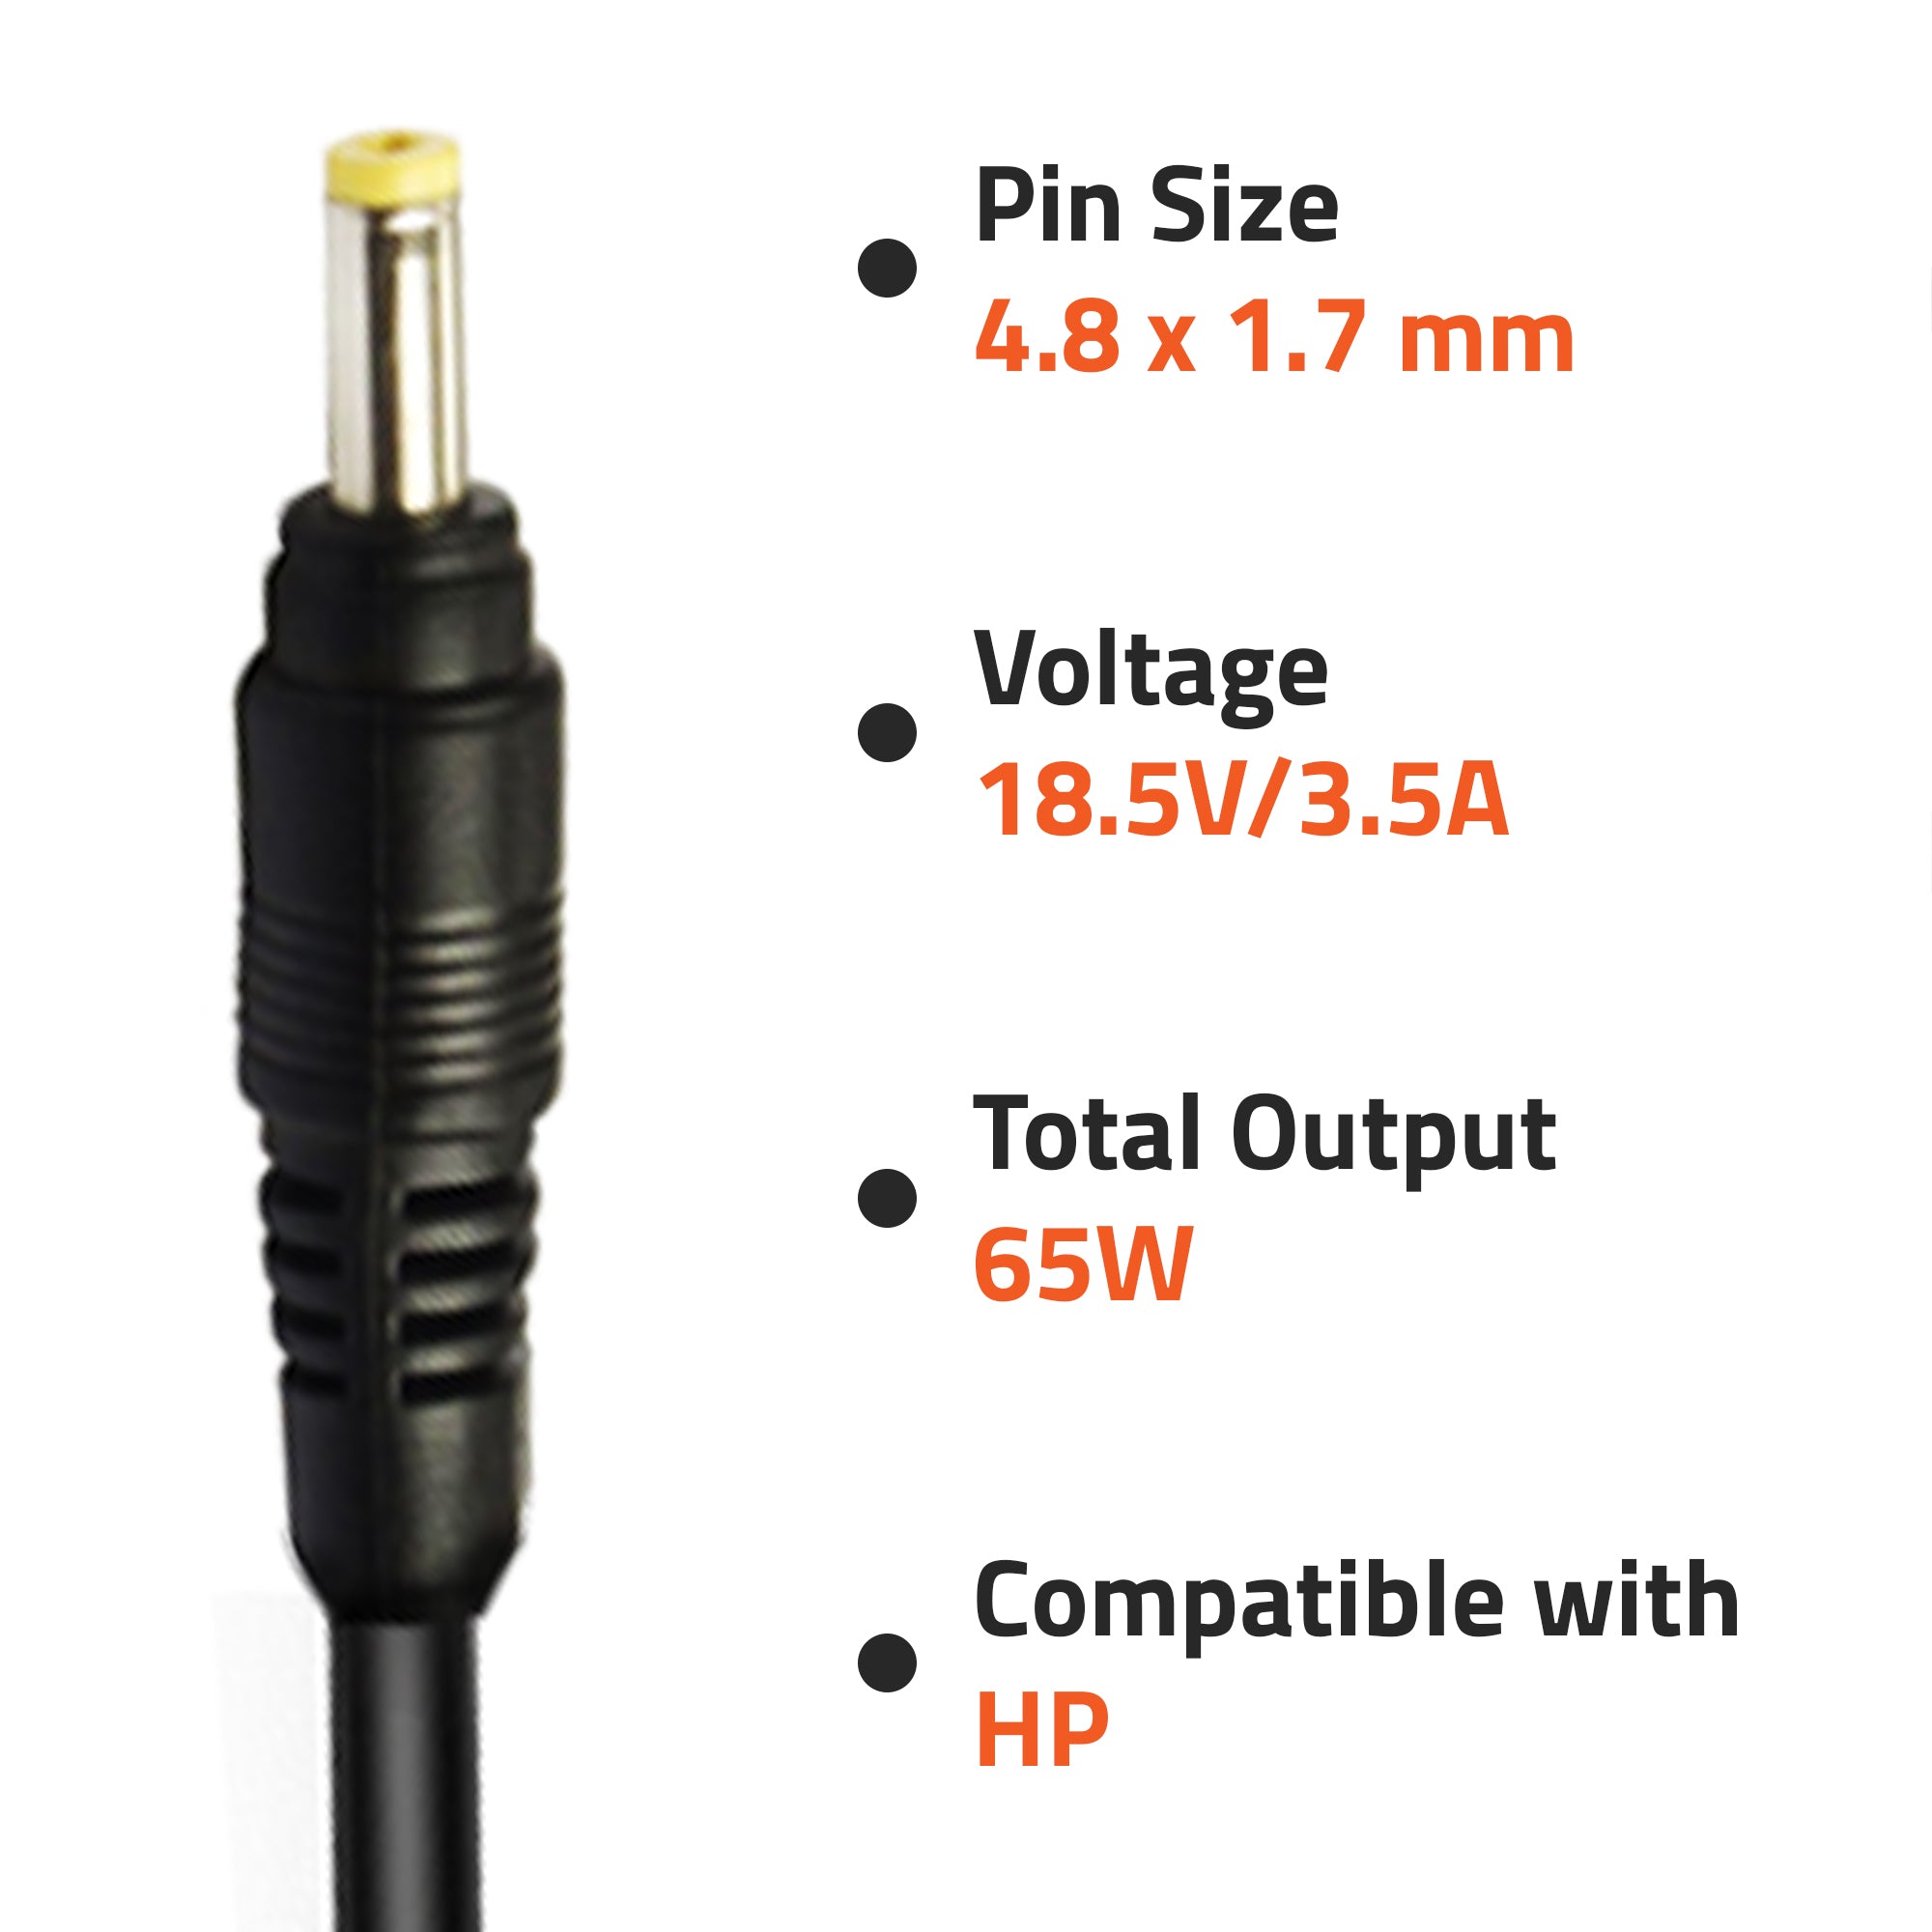 AR0502 65Watt Laptop Adapter Compatible with HP Laptops (18.5V/3.5A ,Yellow Pin : 4.8 x 1.7mm)